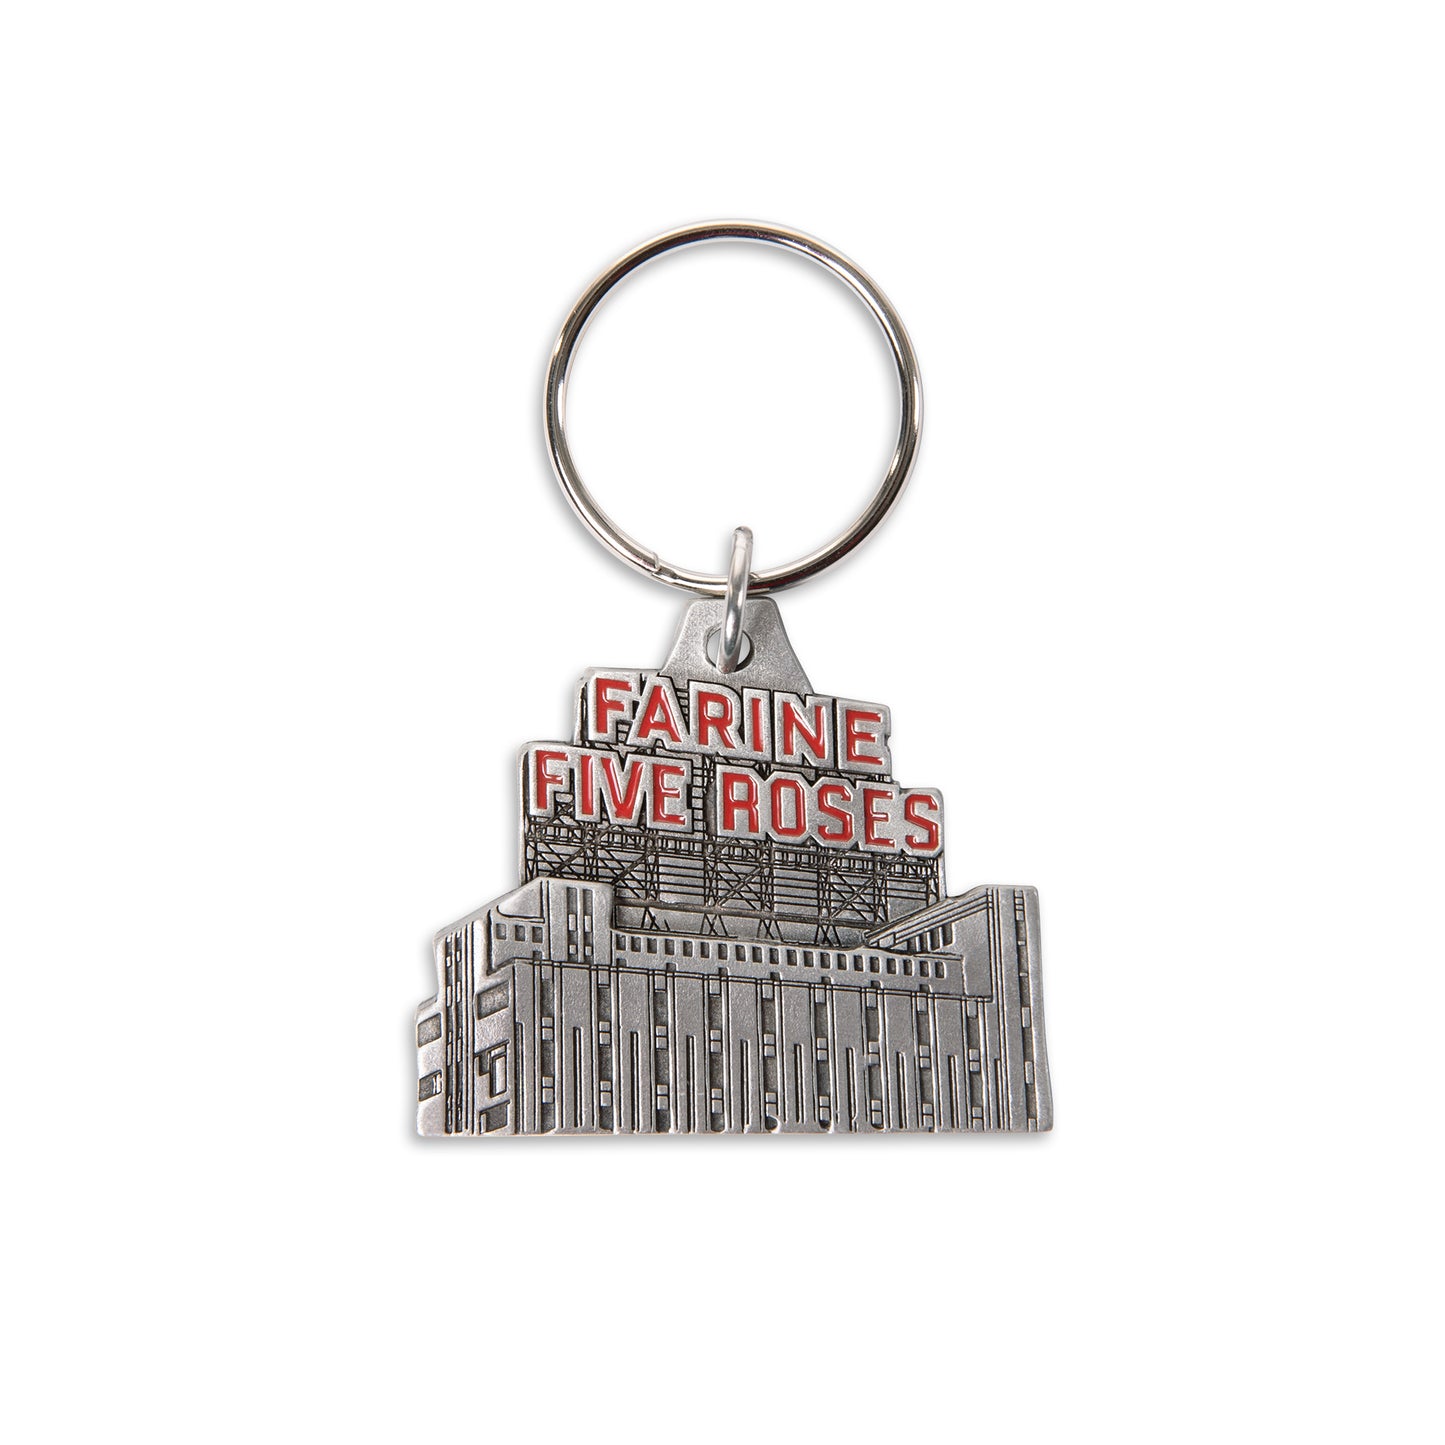 farine five roses, pewter keychain, red paint fill, key ring, montreal landmark, souvenir